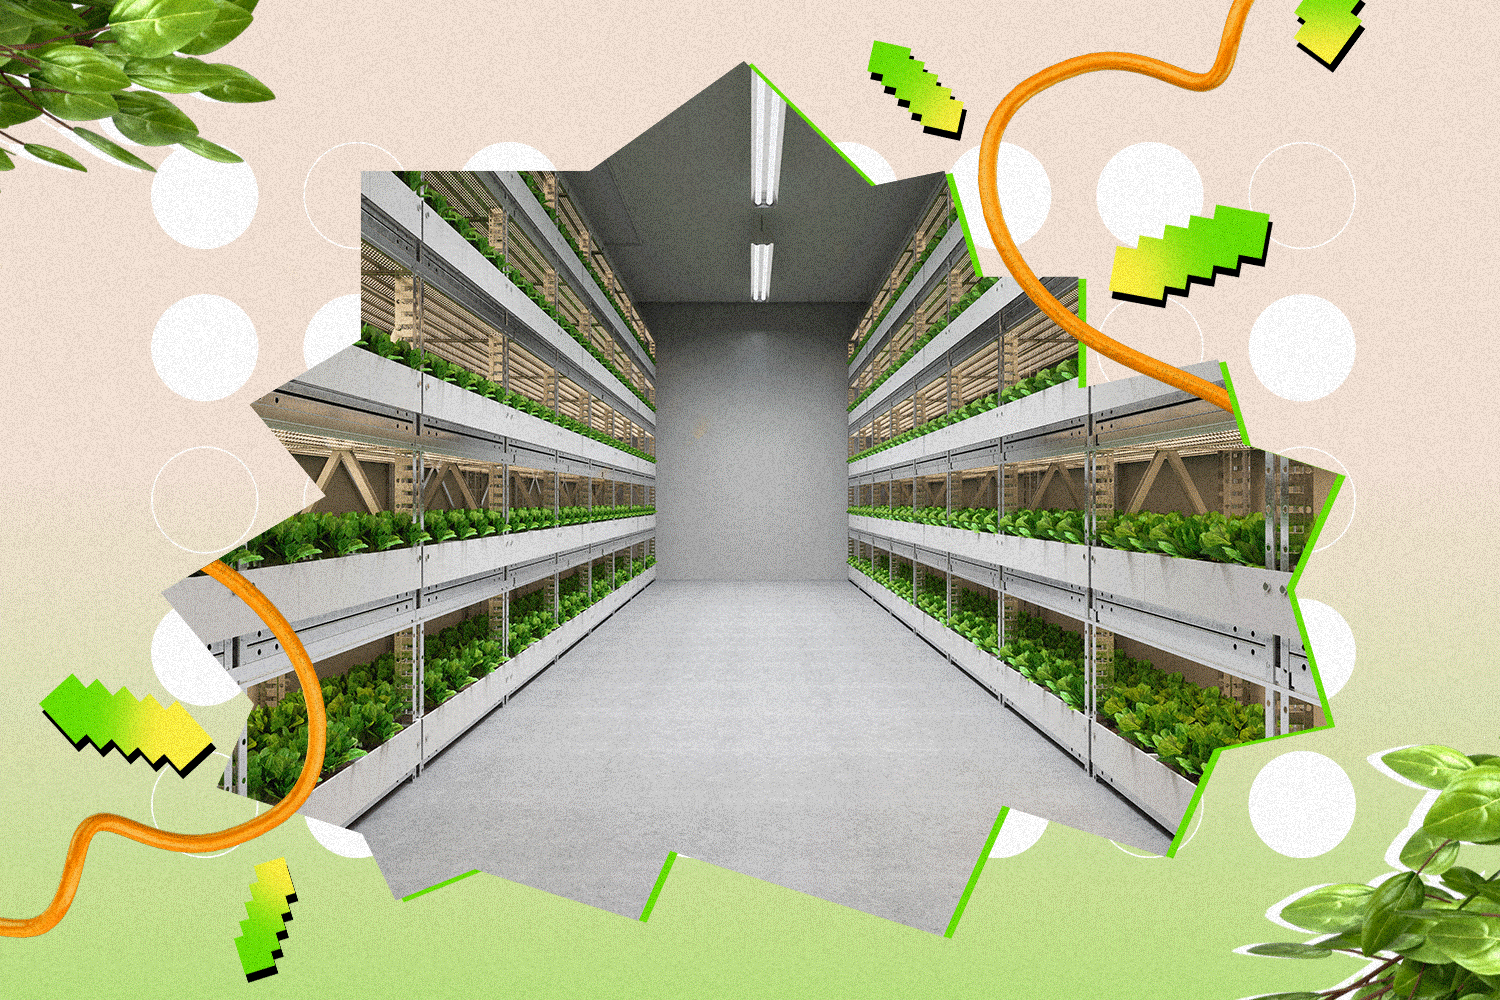 Vertical farms have the vision, but do they have the energy?